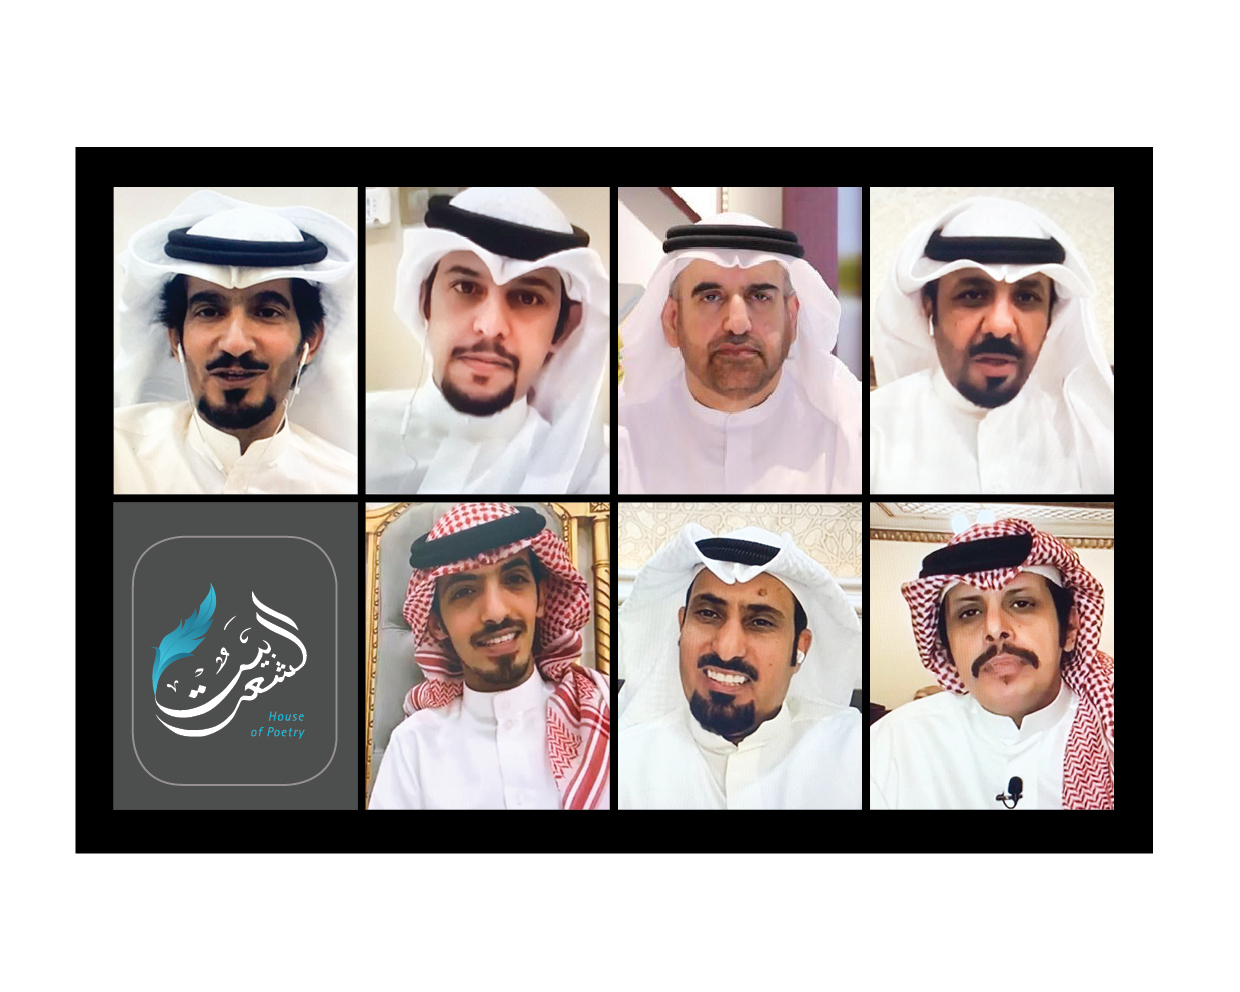 Kuwaiti poets bring back the glories of the folk poem in the House of Poetry in Dubai